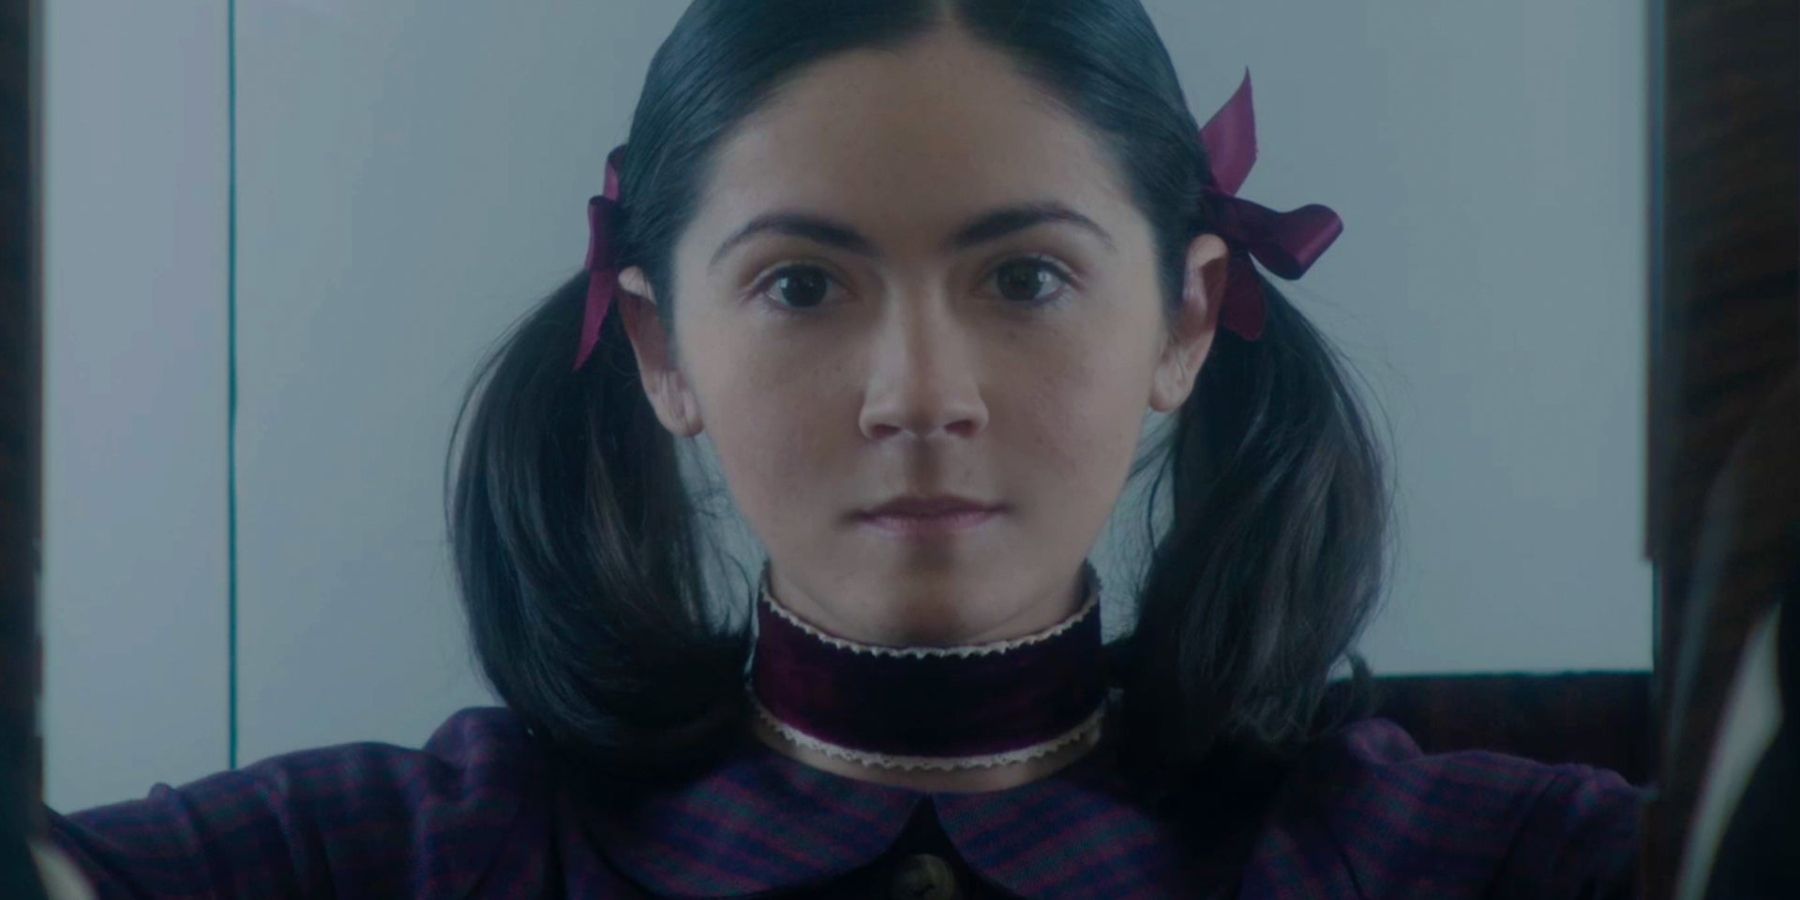 Isabelle Fuhrman as Leena Klammer/Esther Albright in Orphan: First Kill